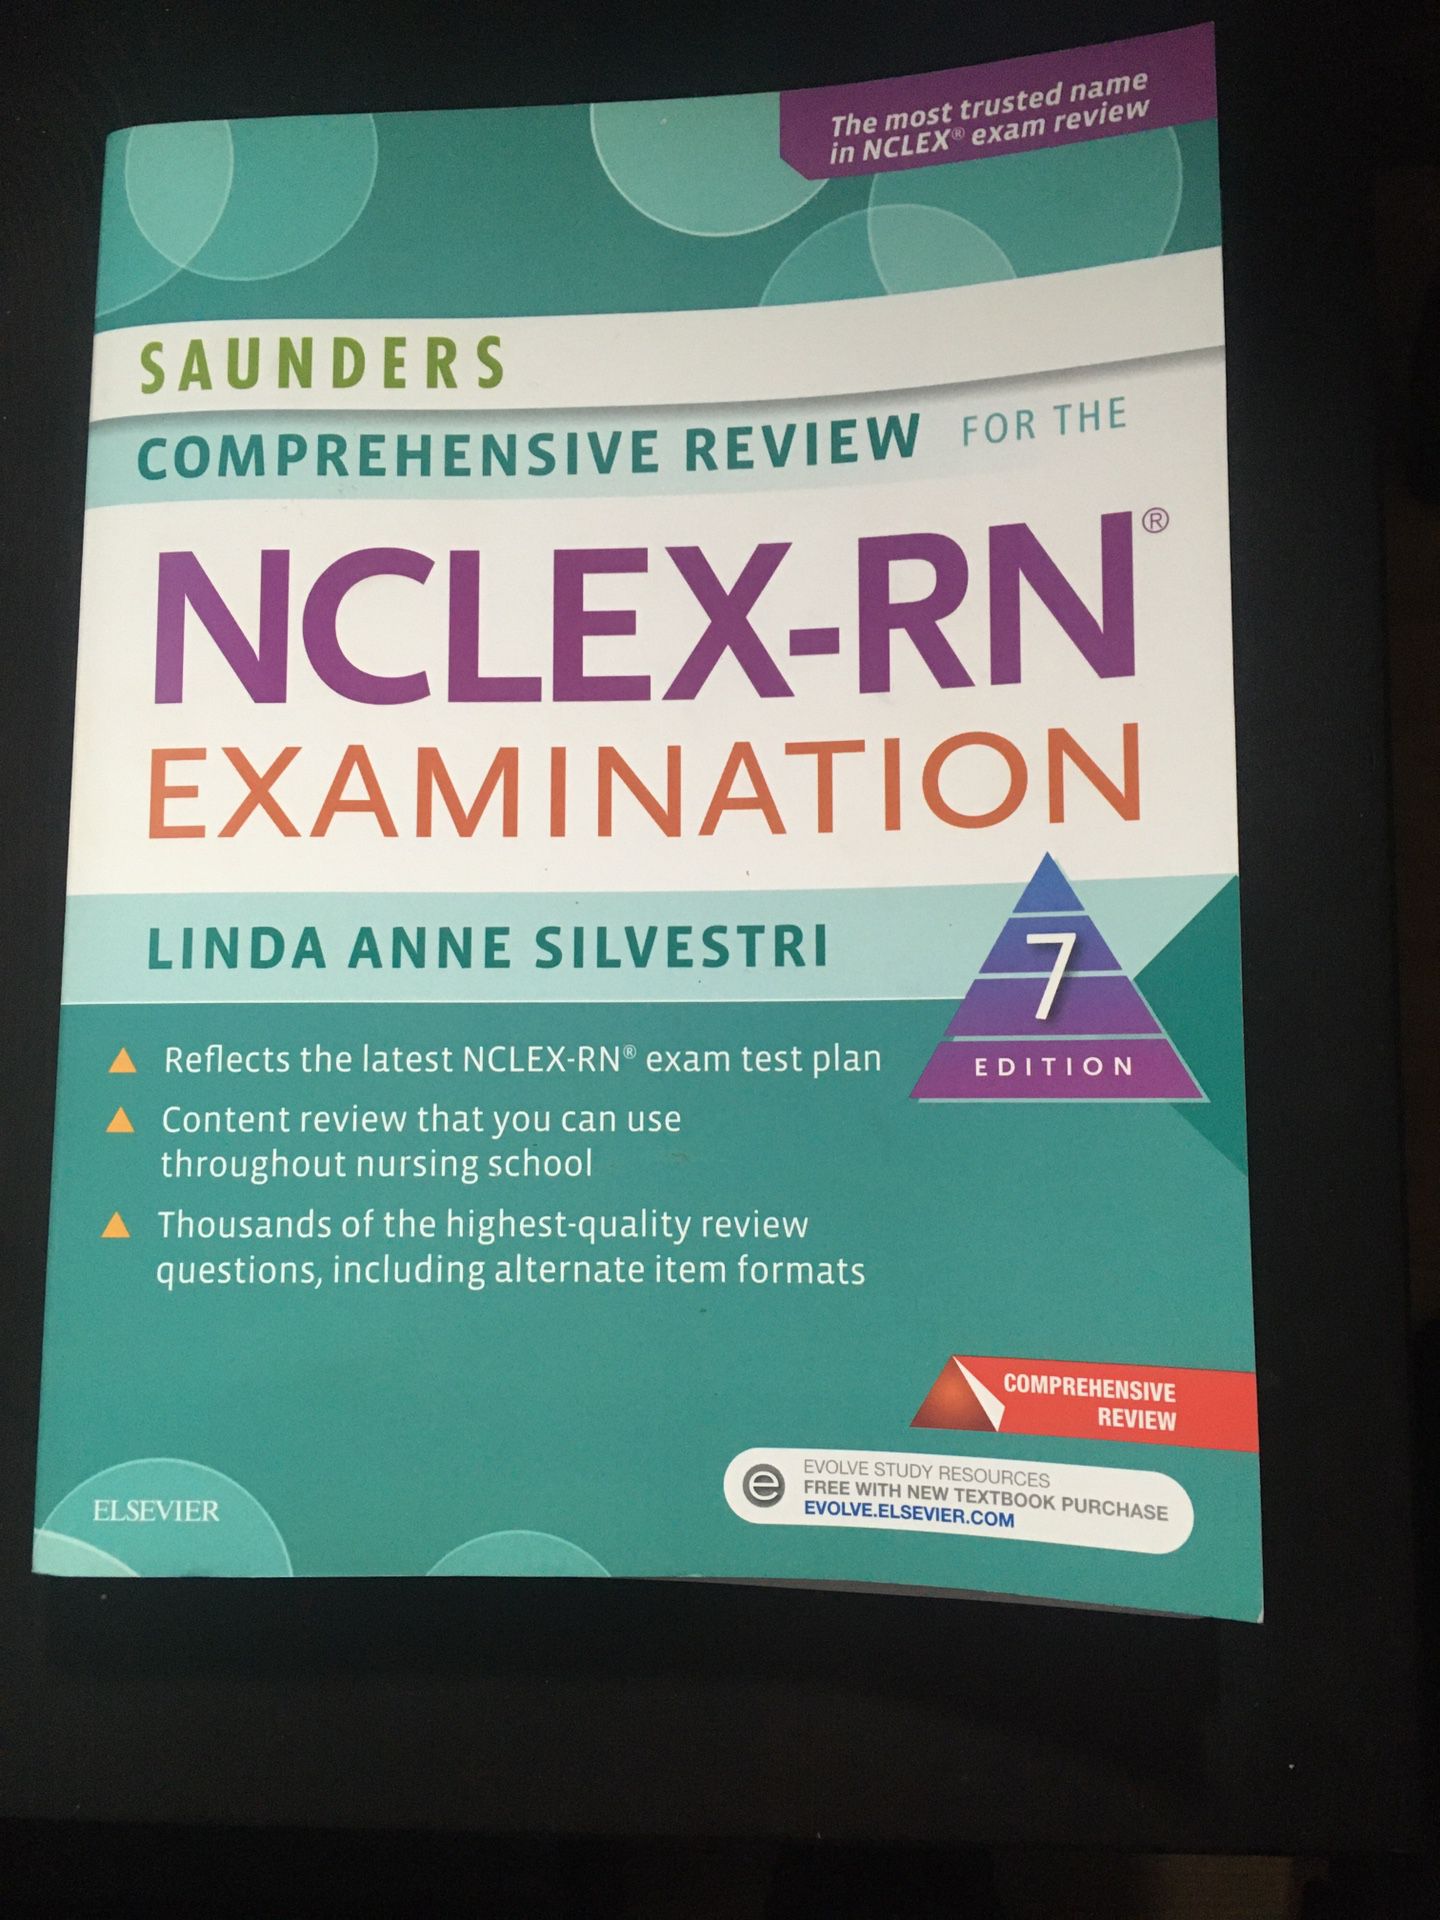 Saunders Comprehensive Review NCLEX-RN Examination (7th edition)